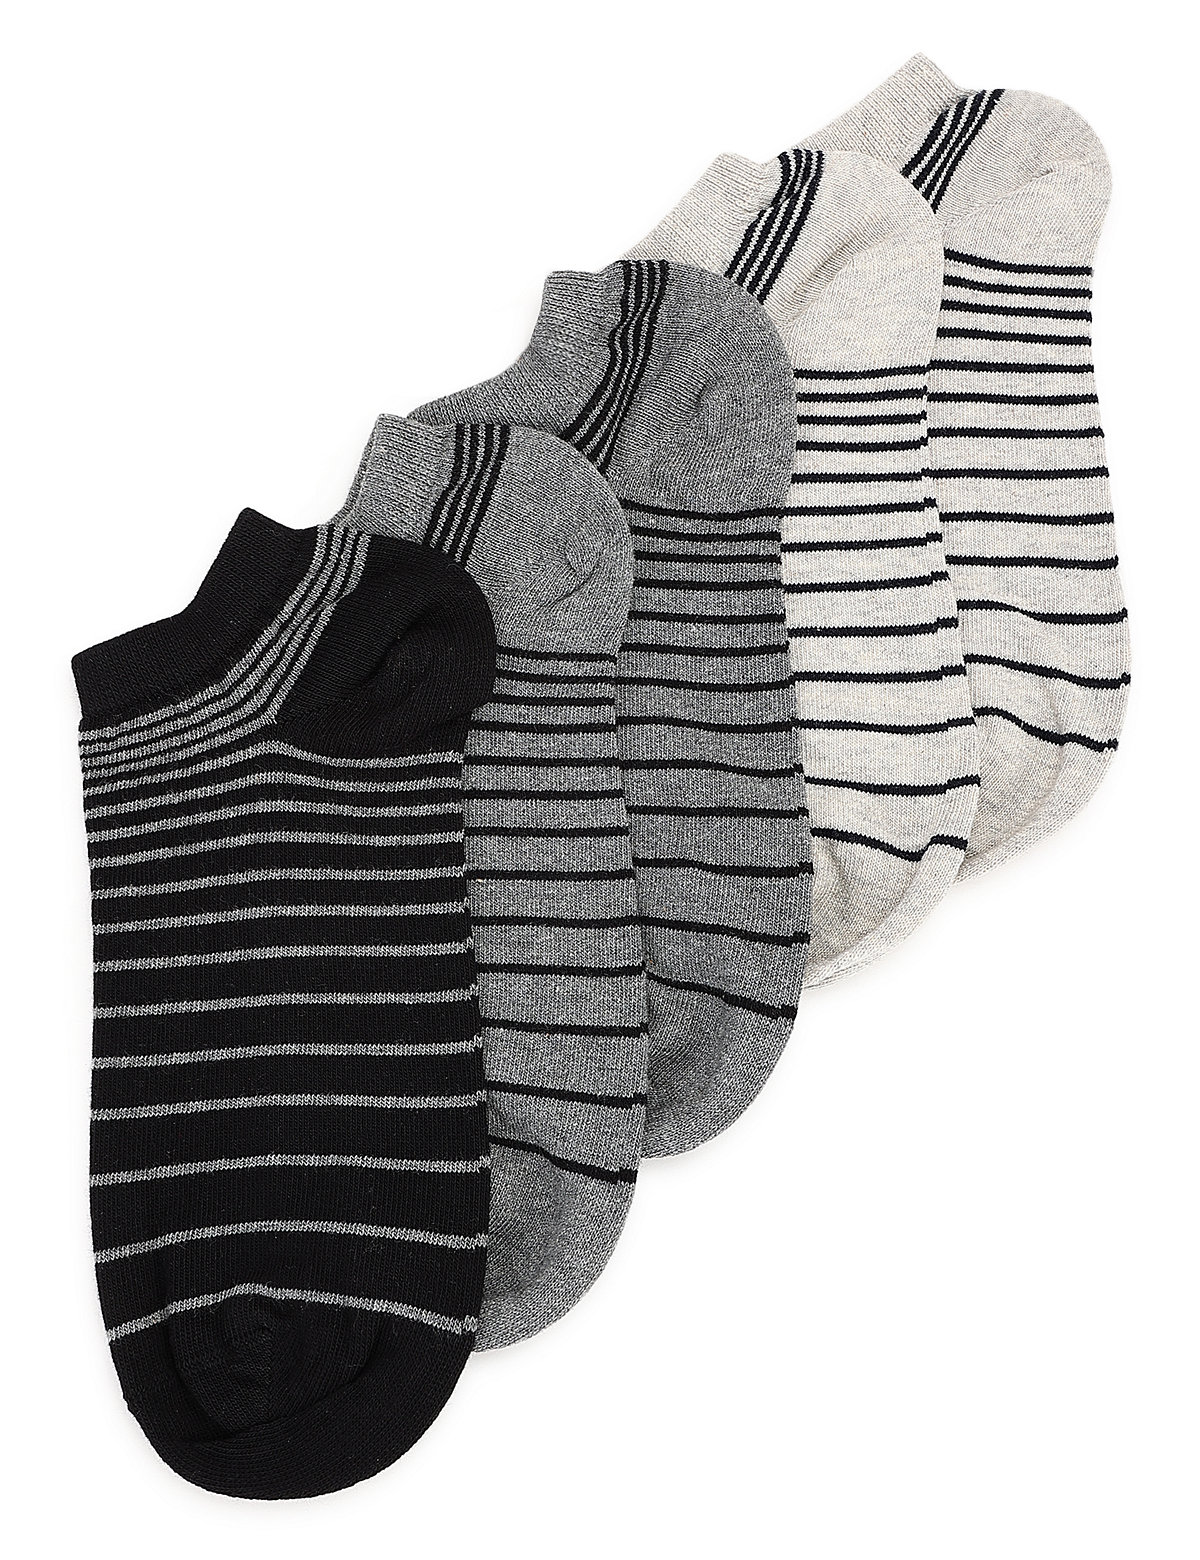 Pack of 5 Pair Cotton Mix Striped Socks